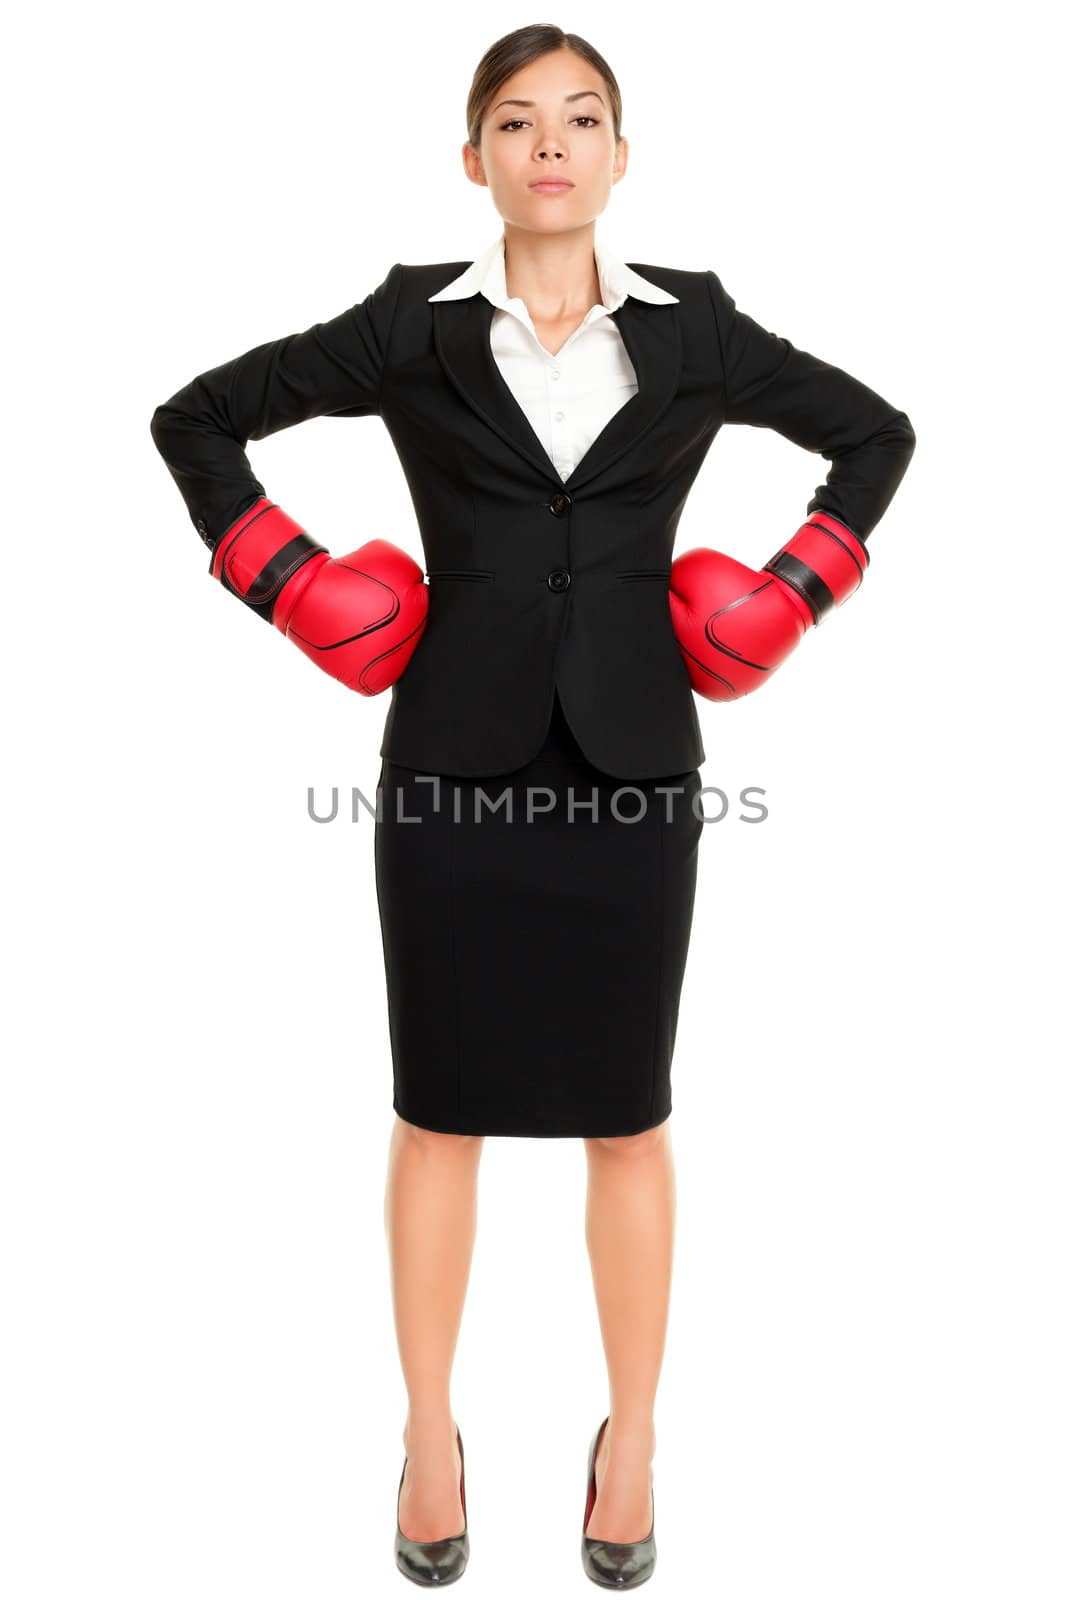 Strong business woman boss executive concept. Businesswoman standing intimidating wearing boxing gloves ready for the competition. Confident attitude by young mixed race female model in suit.